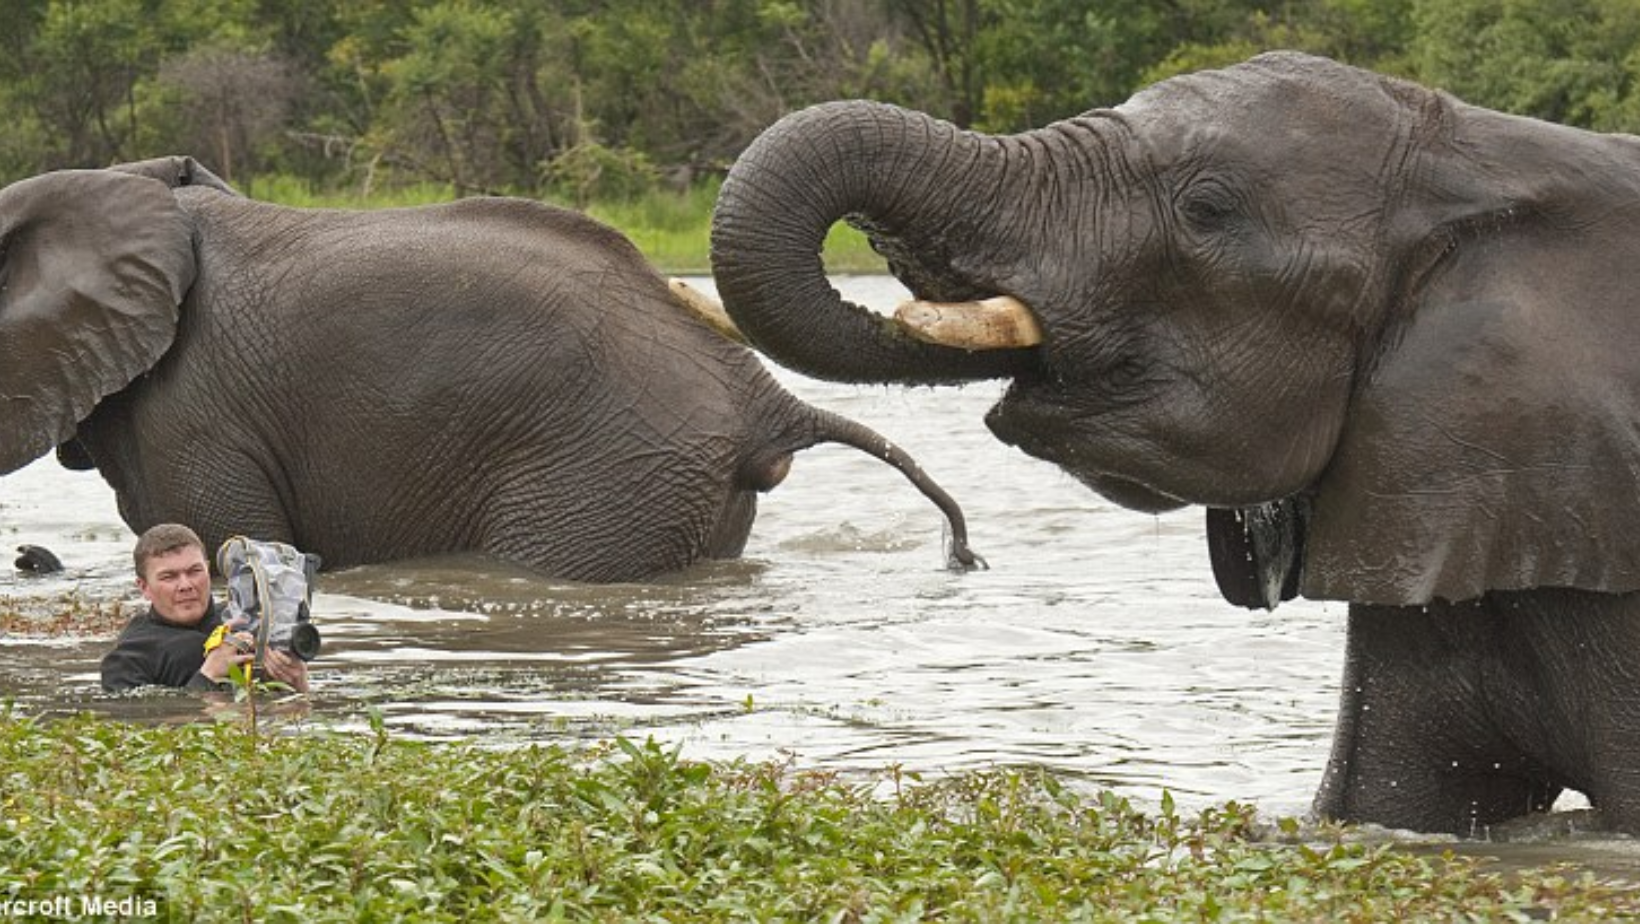 Ahead Of The Herd: Wildlife Photographer Goes Swimming With Elephants To Capture Incredible Images